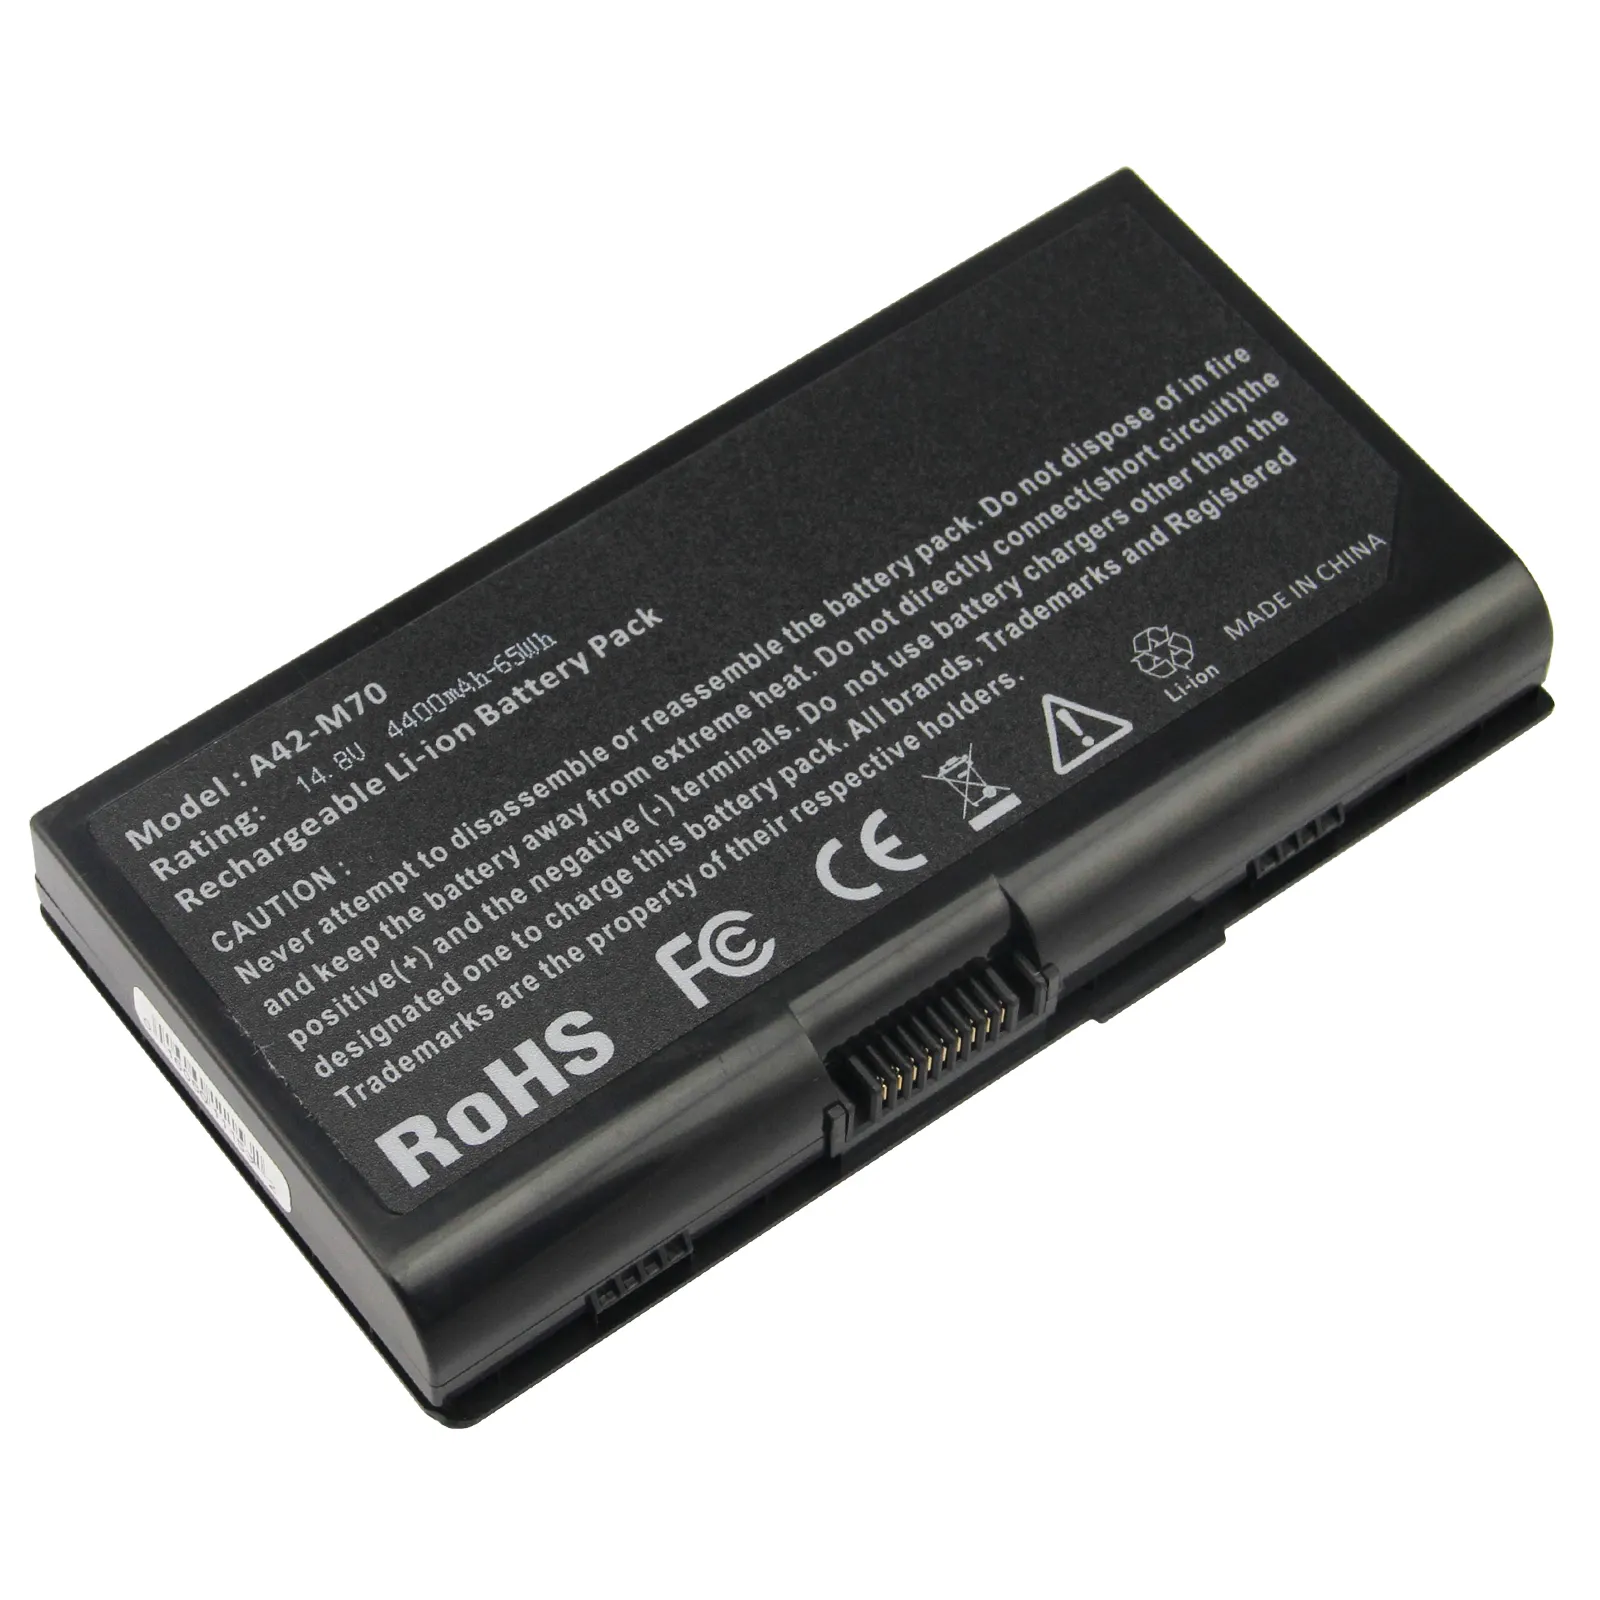 14.8v 4400mAh Replacement Laptop Battery A42-M70 G71 G72 N70 X71 wholesale laptop batteryFOR ASUS